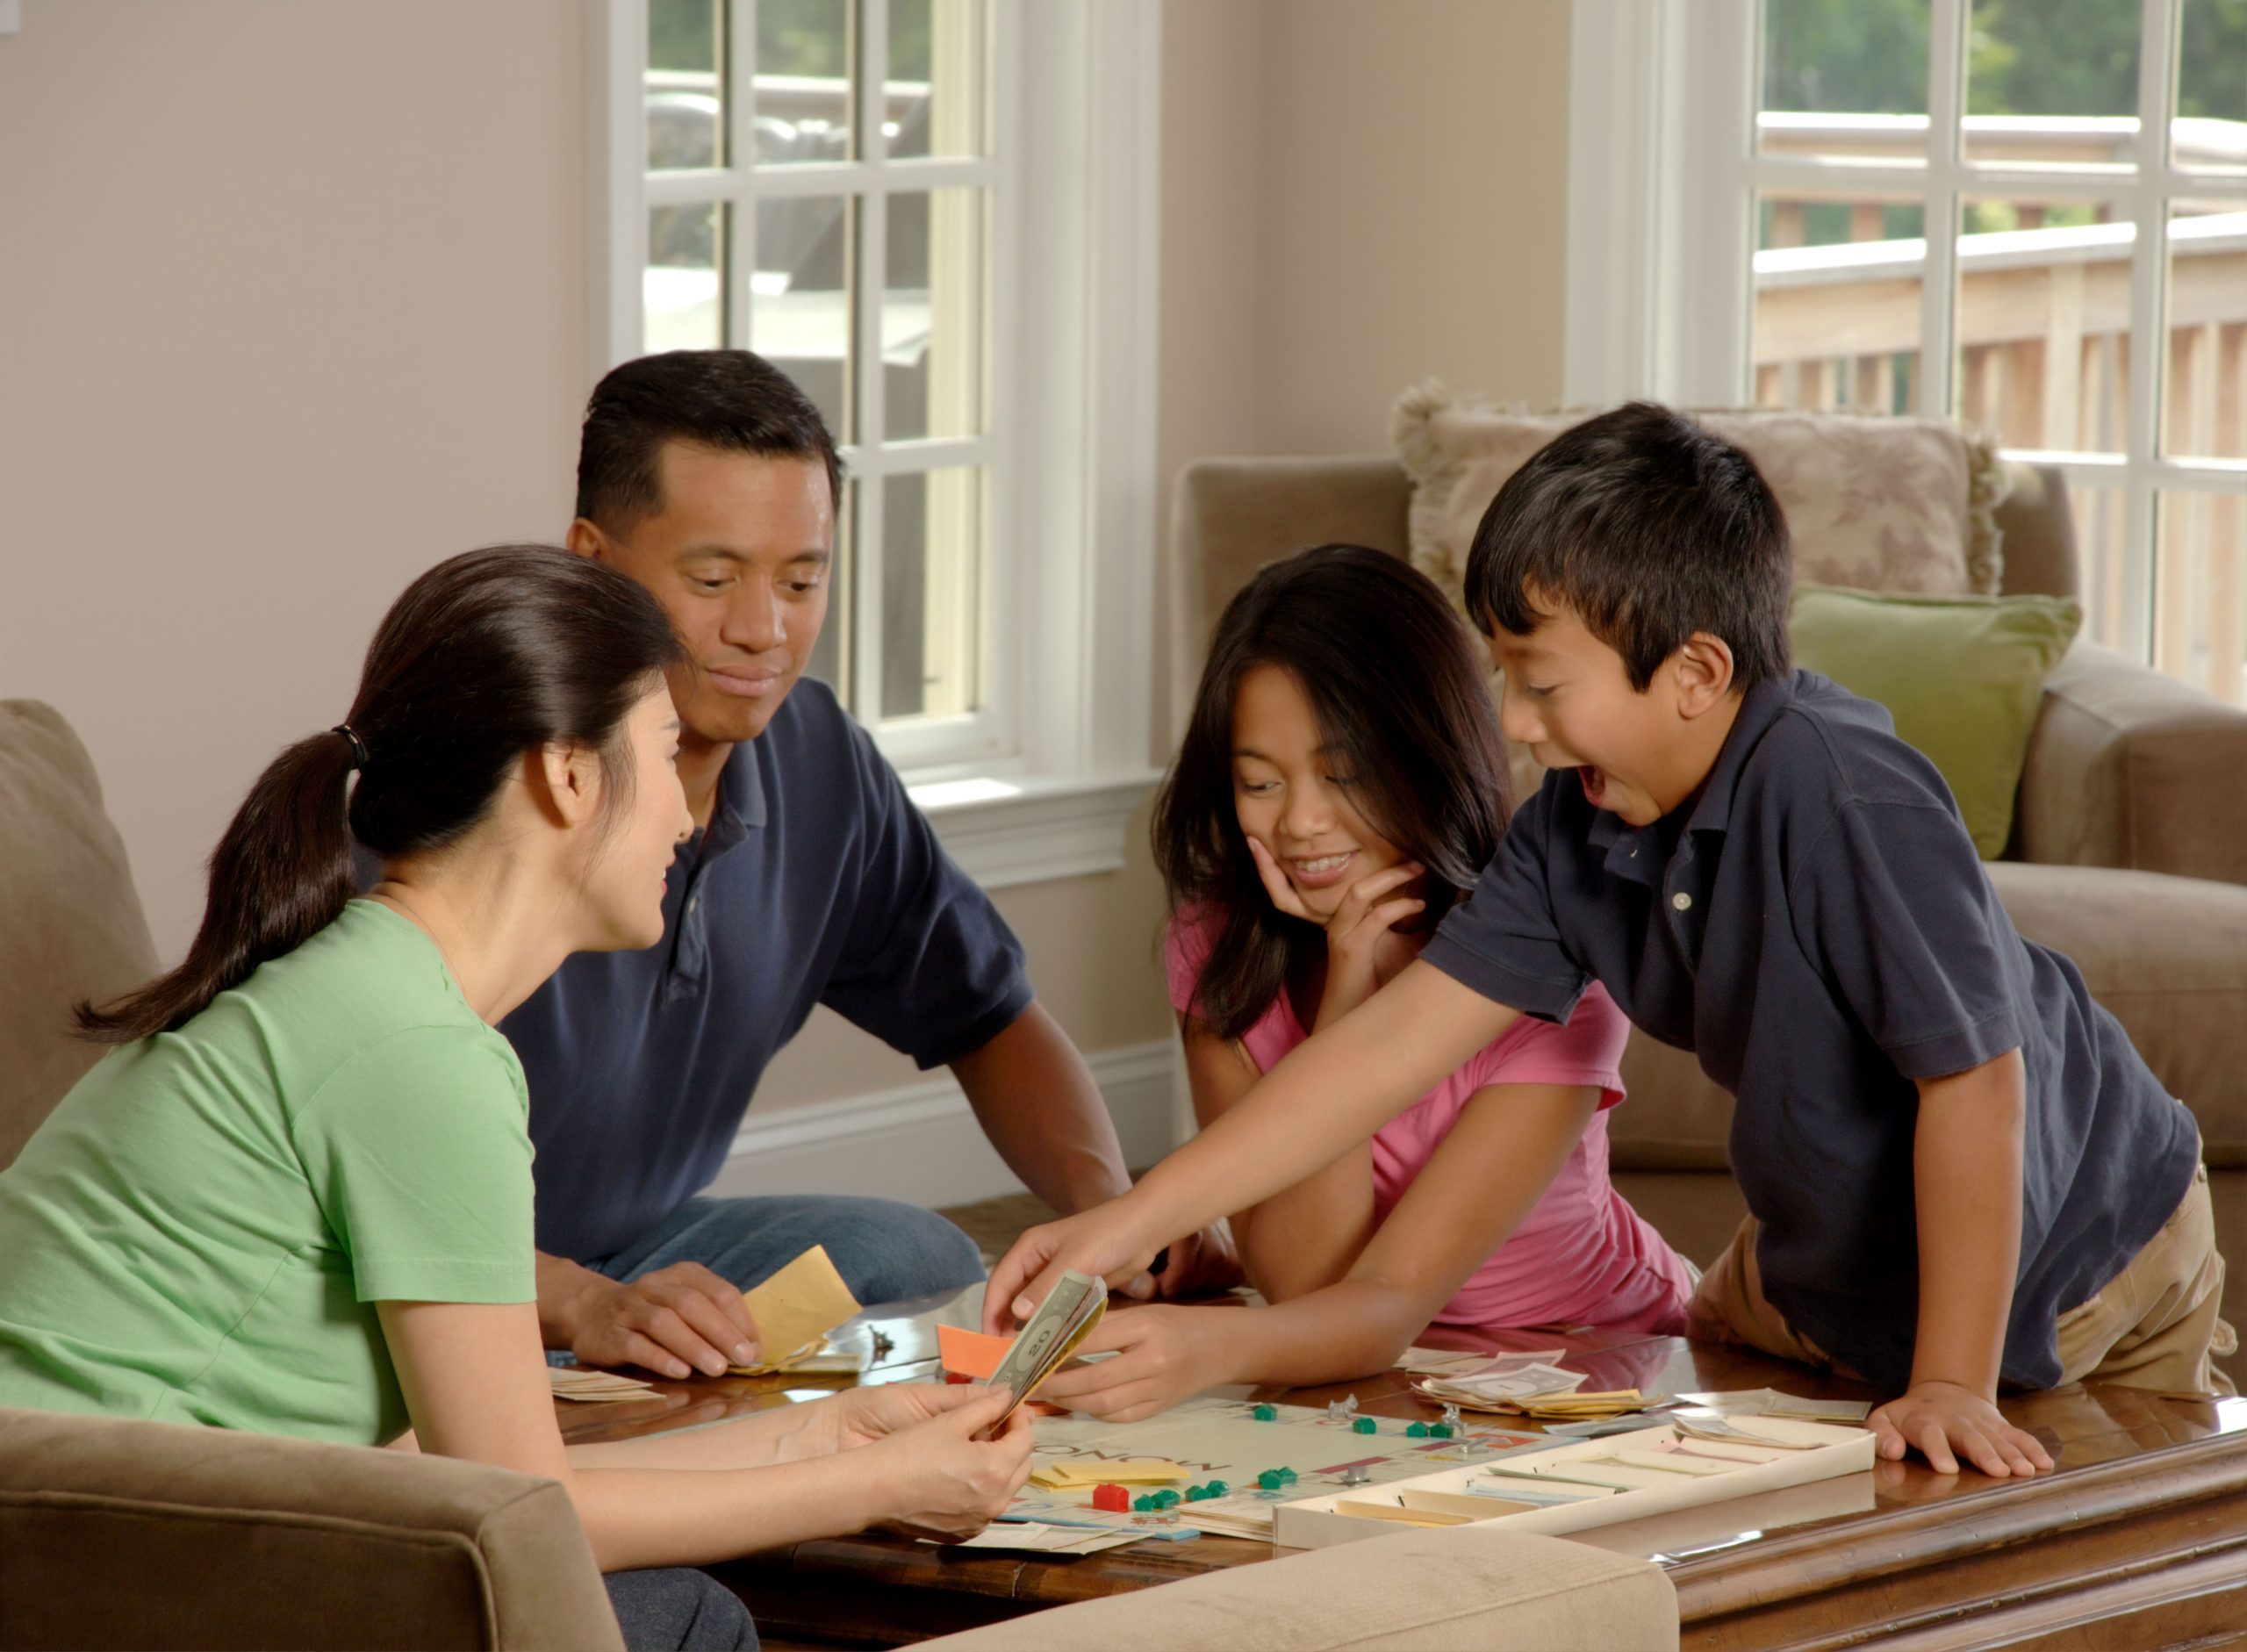 Fun Family Indoor Games – A Must Try for Winter Weekends